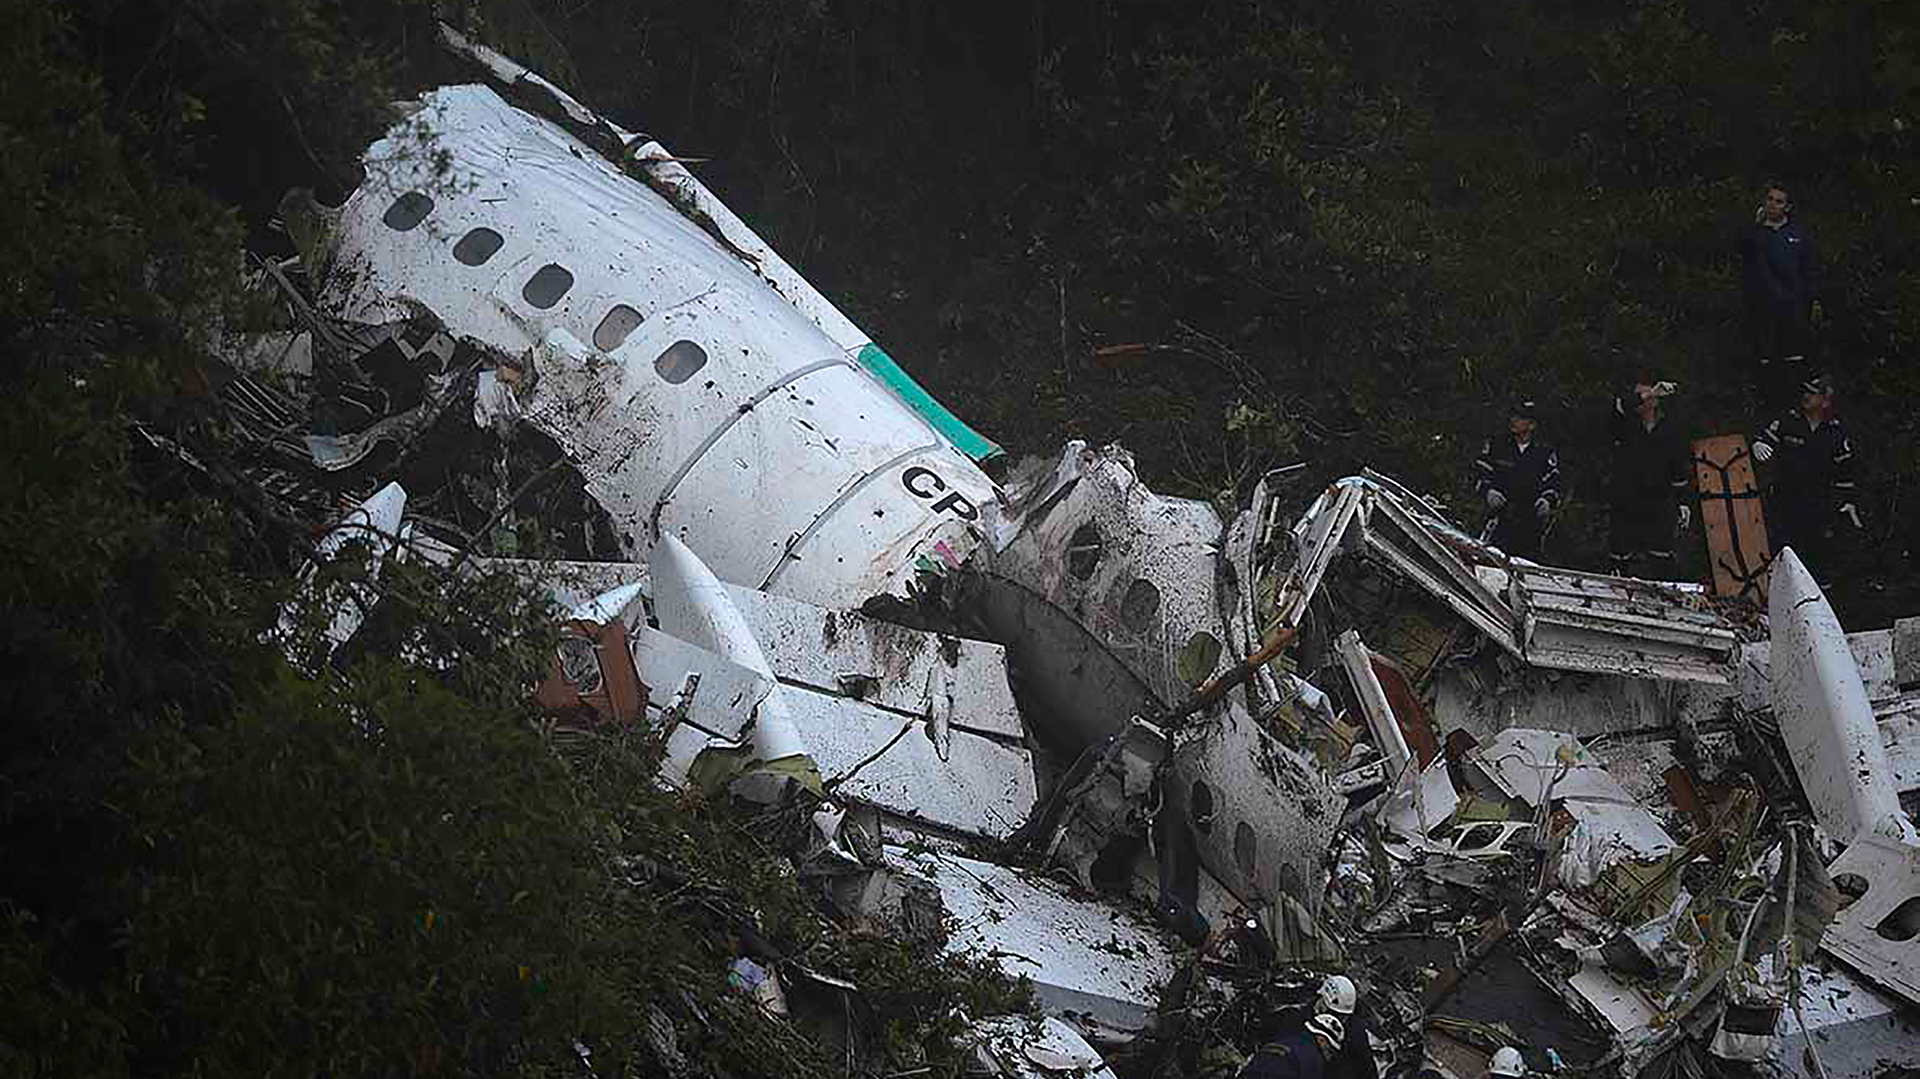 The wreckage of the LAMIA airlines charter plane carrying members of the Chapecoense Real football team is seen after it crashed in the mountains of Cerro Gordo, municipality of La Union, on November 29, 2016. A charter plane carrying the Brazilian football team crashed in the mountains in Colombia late Monday, killing as many as 75 people, officials said. / AFP PHOTO / Raul ARBOLEDA